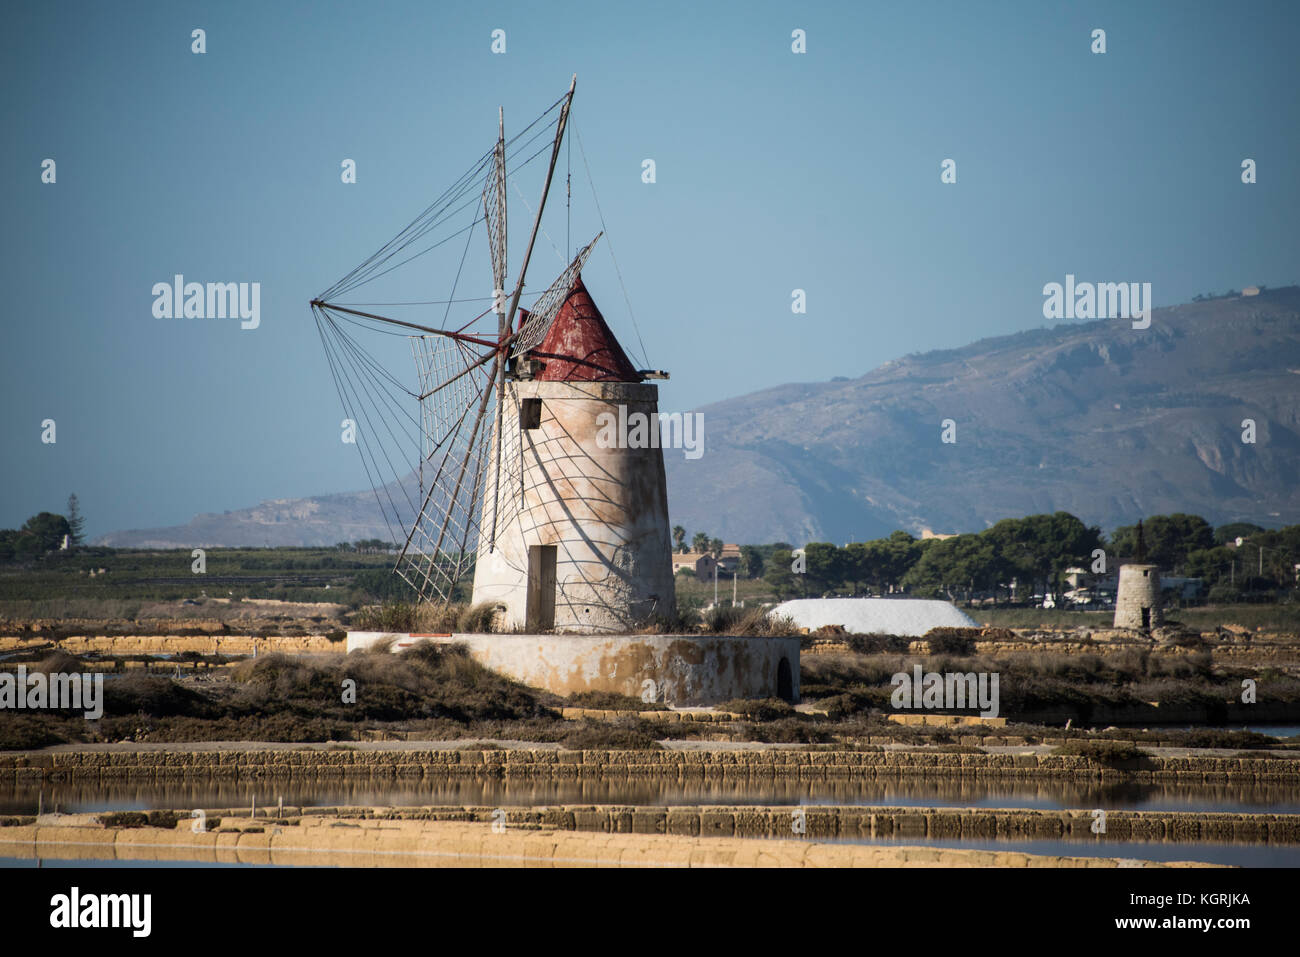 Old windmill used to pump water from the salt pools, Moxia, Marsala, Sicily Stock Photo